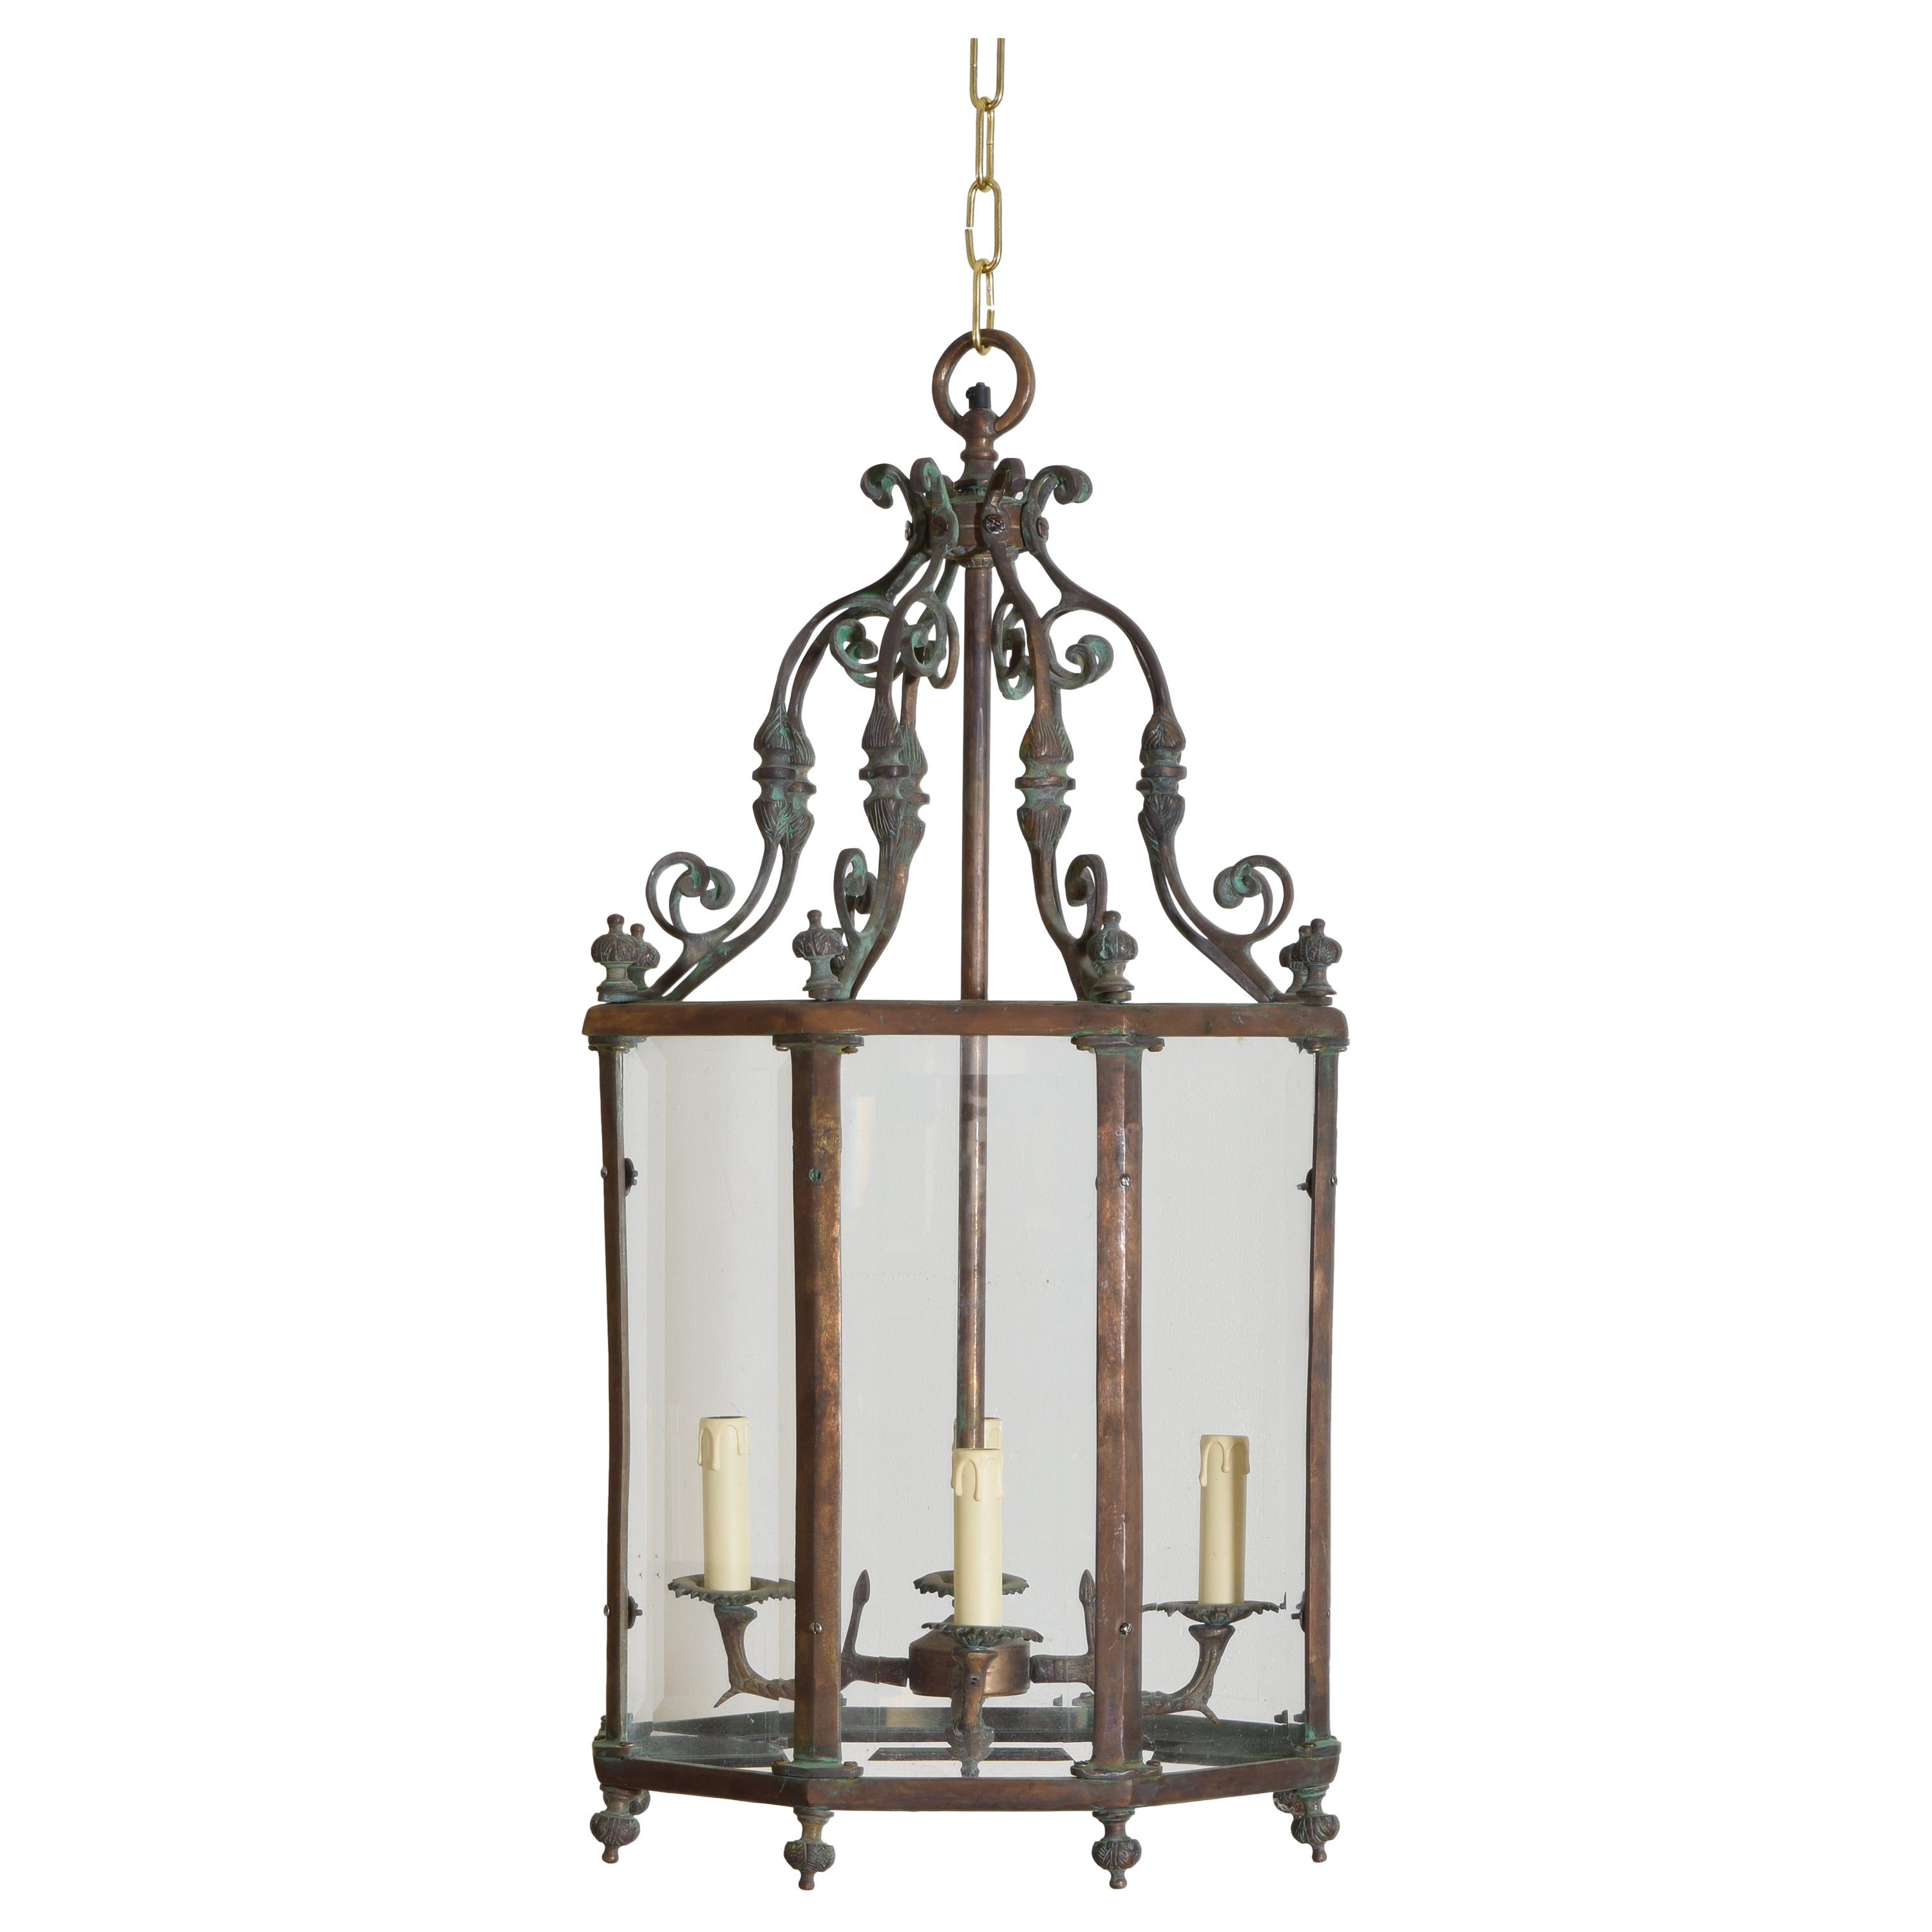 Belgian Rococo Style Brass & Copper Octagonal Lantern, 19th/20th century For Sale